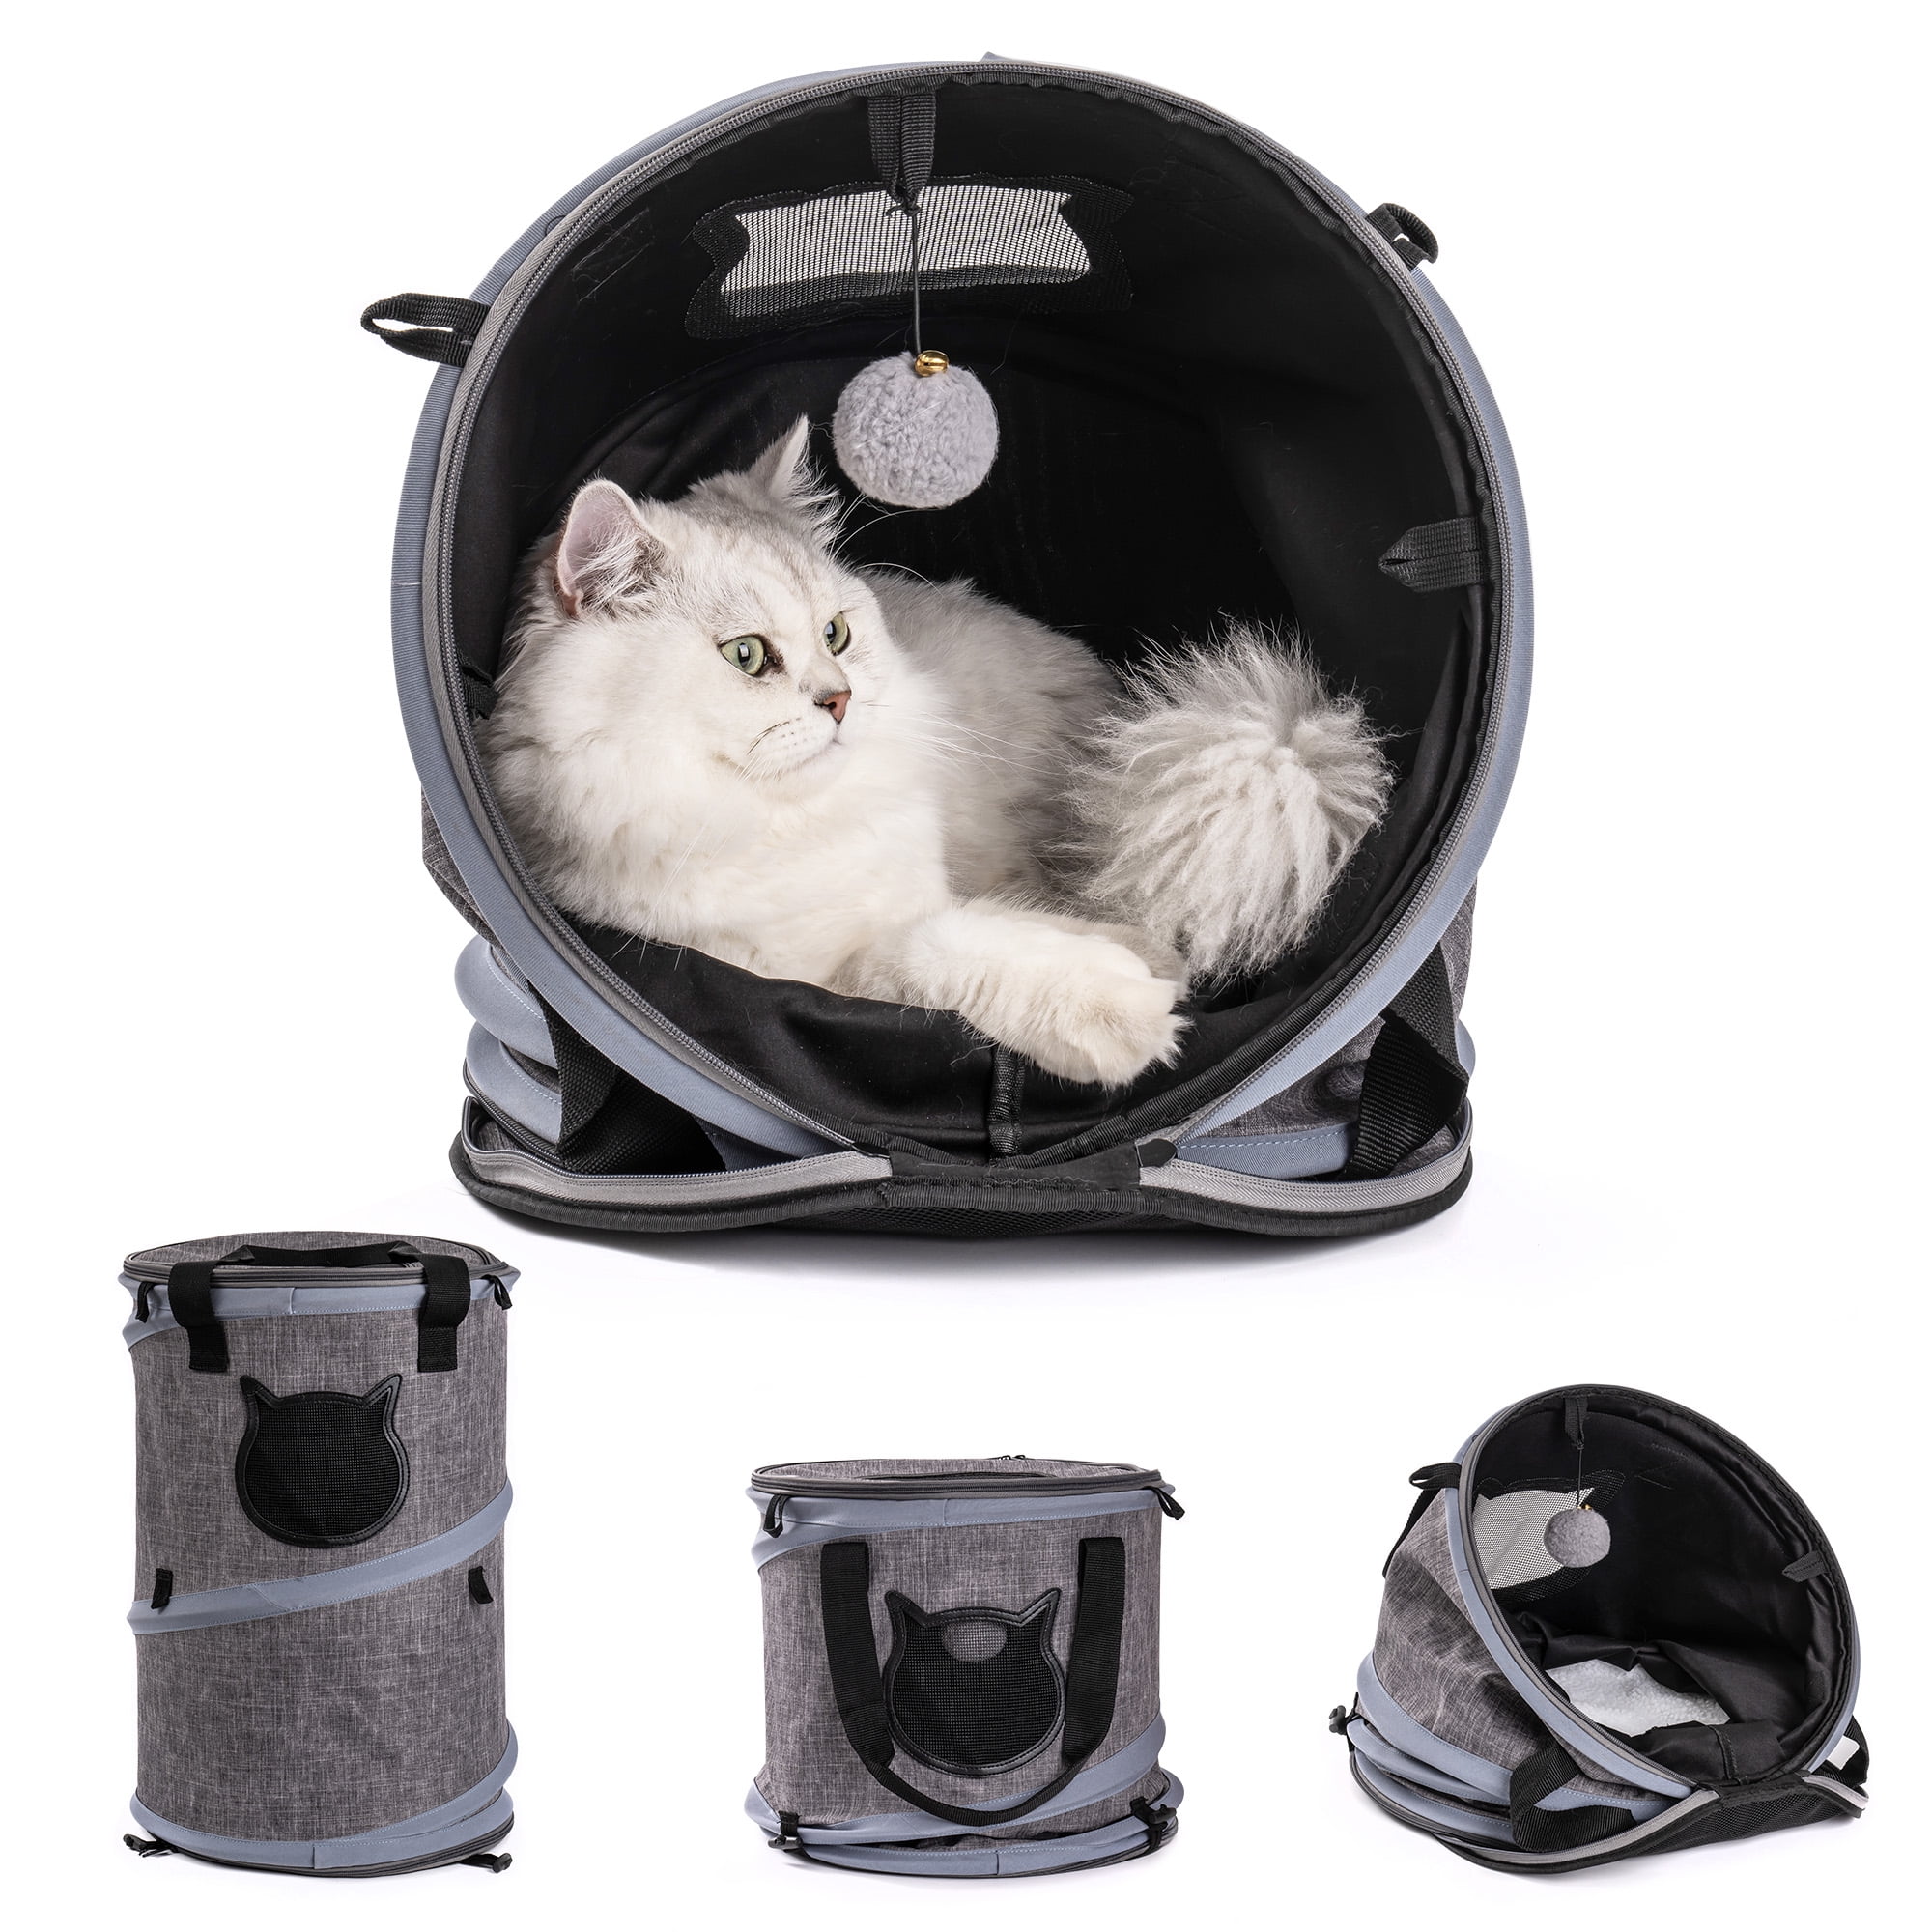 Expandable Pet Travel Bag,3 In 1 Cat Bed With With Plush  BallsFoldabletunnel Pet Travel Carrier Bag 